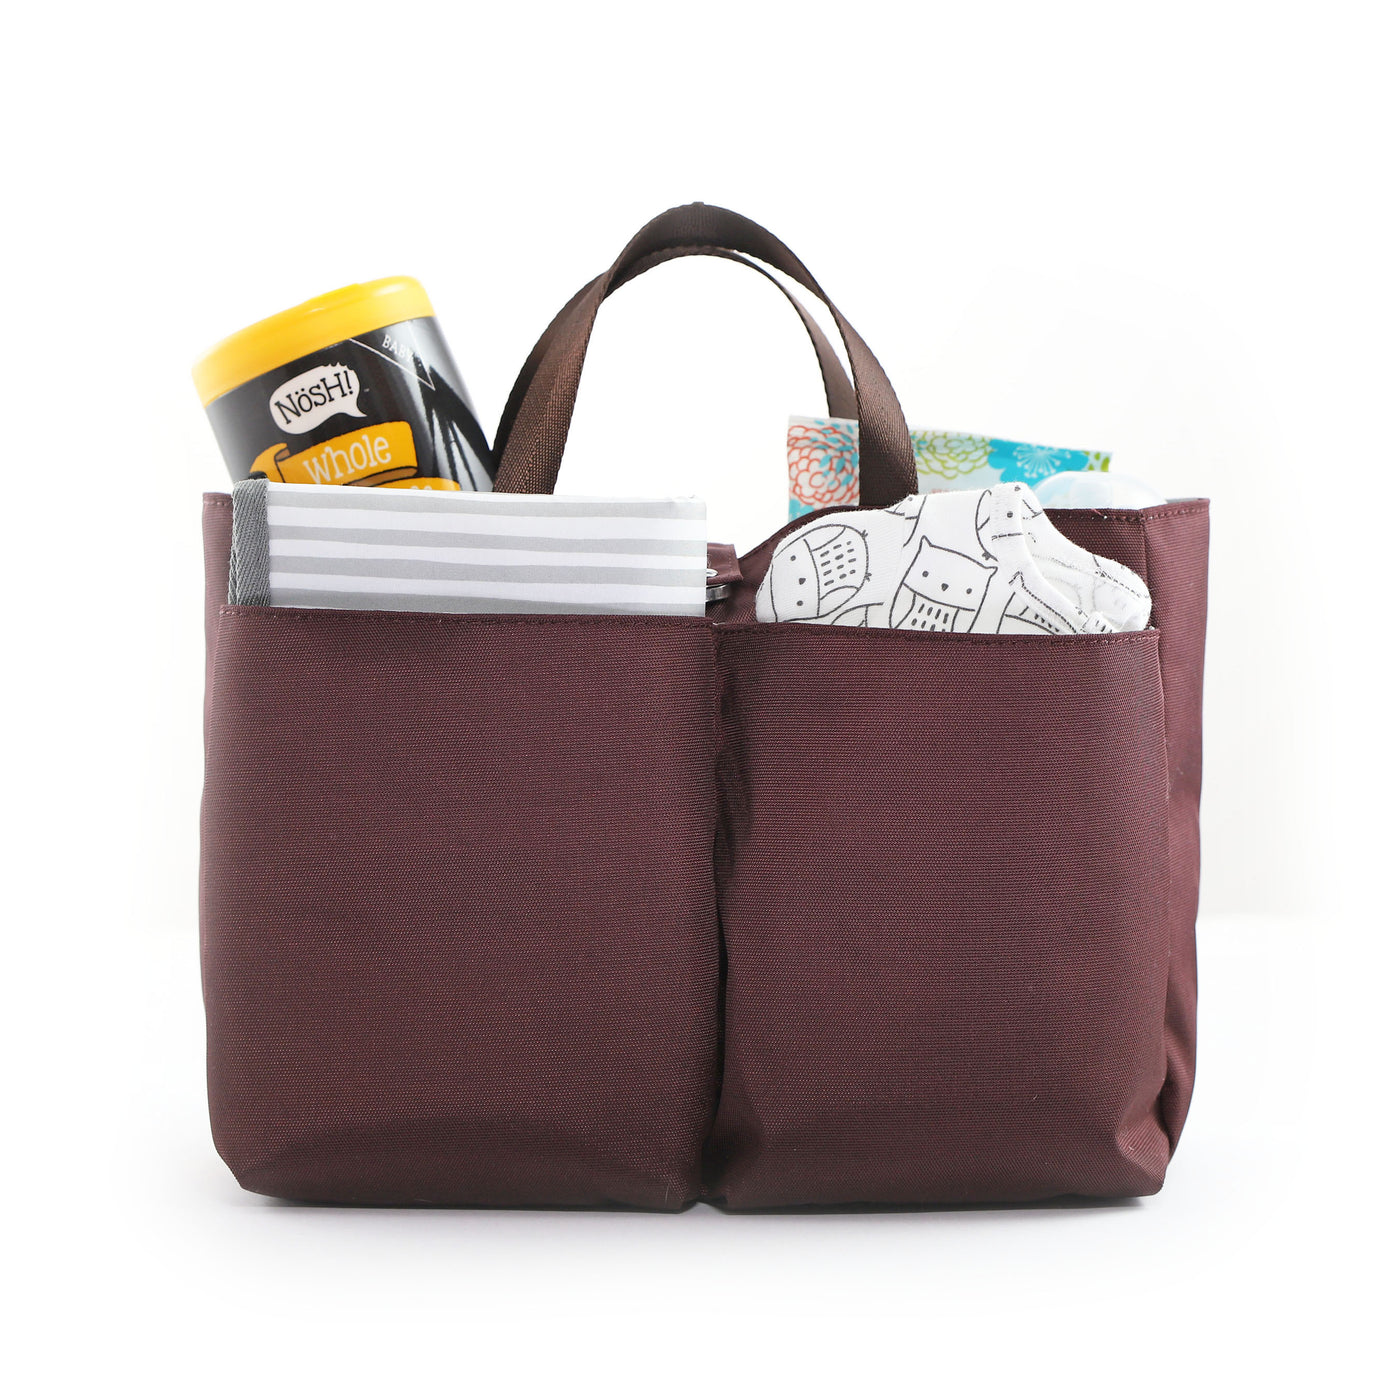 Burgundy Organizer insert with 2 carry handles, packed with diapers & baby accessories in two front pockets and shown on white tabletop.